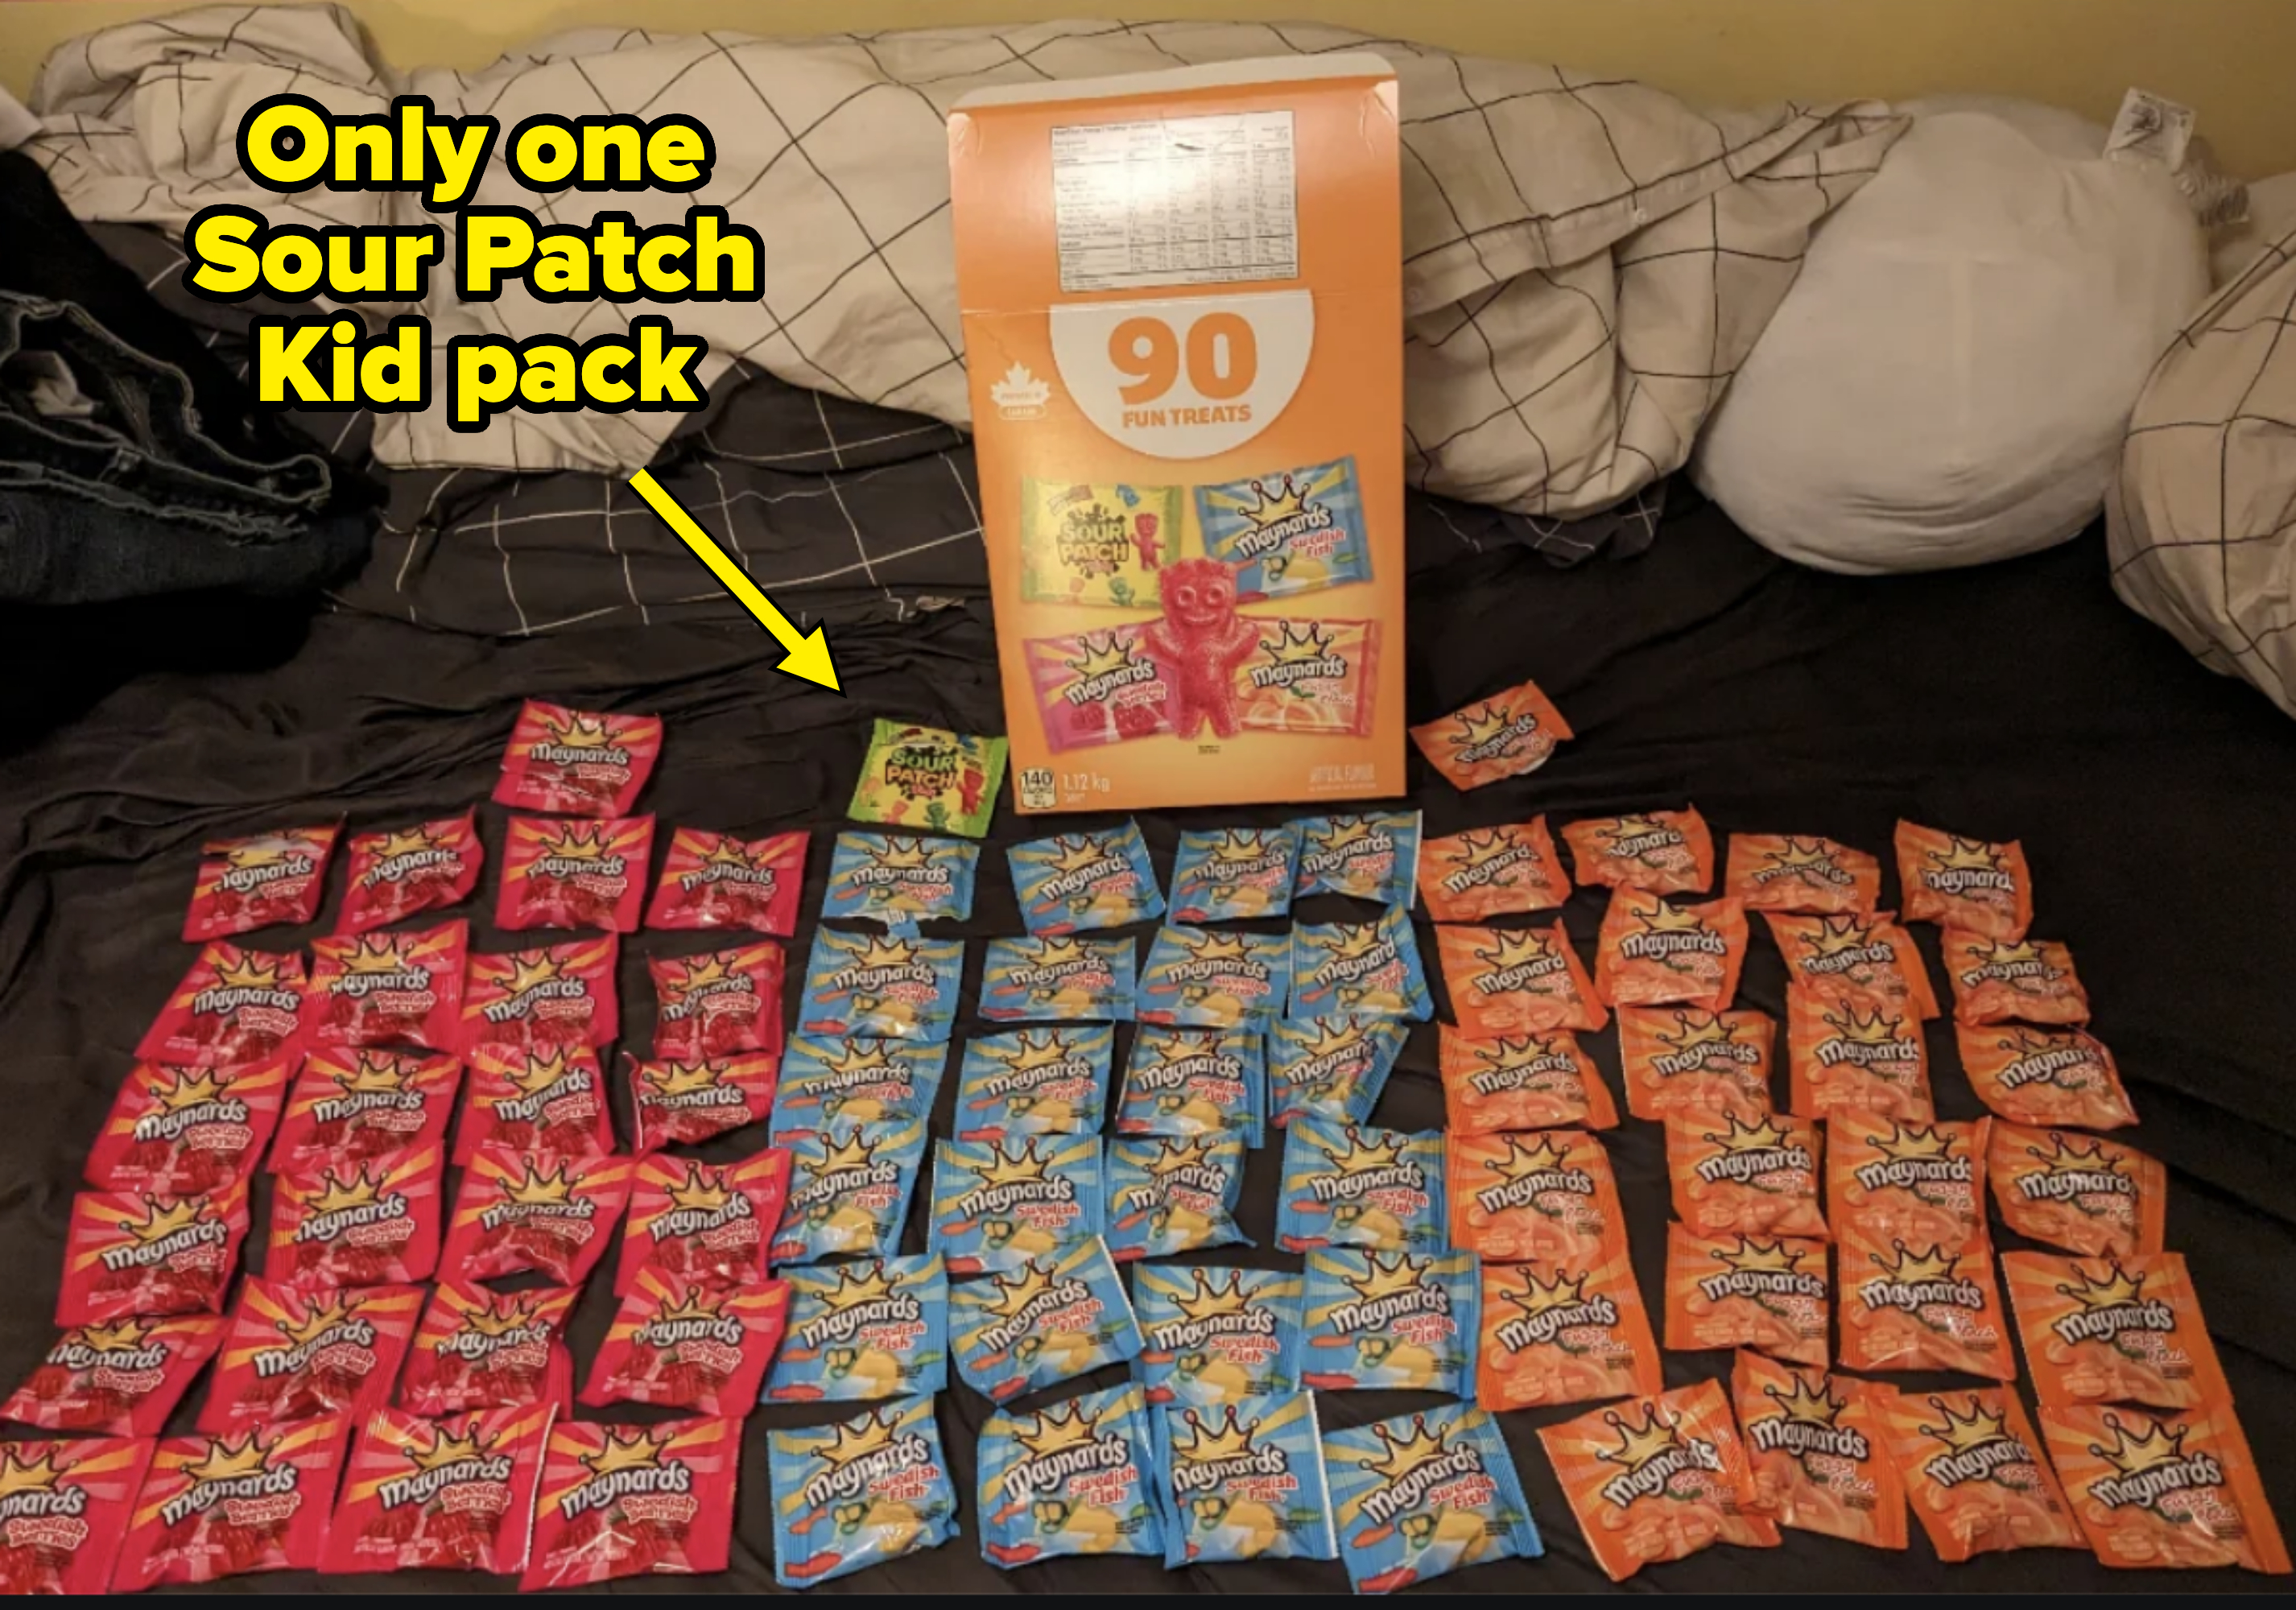 A large box labeled &quot;90 Fun Treats&quot; is surrounded by sorted piles of Sour Patch Kids candy packs on a bed